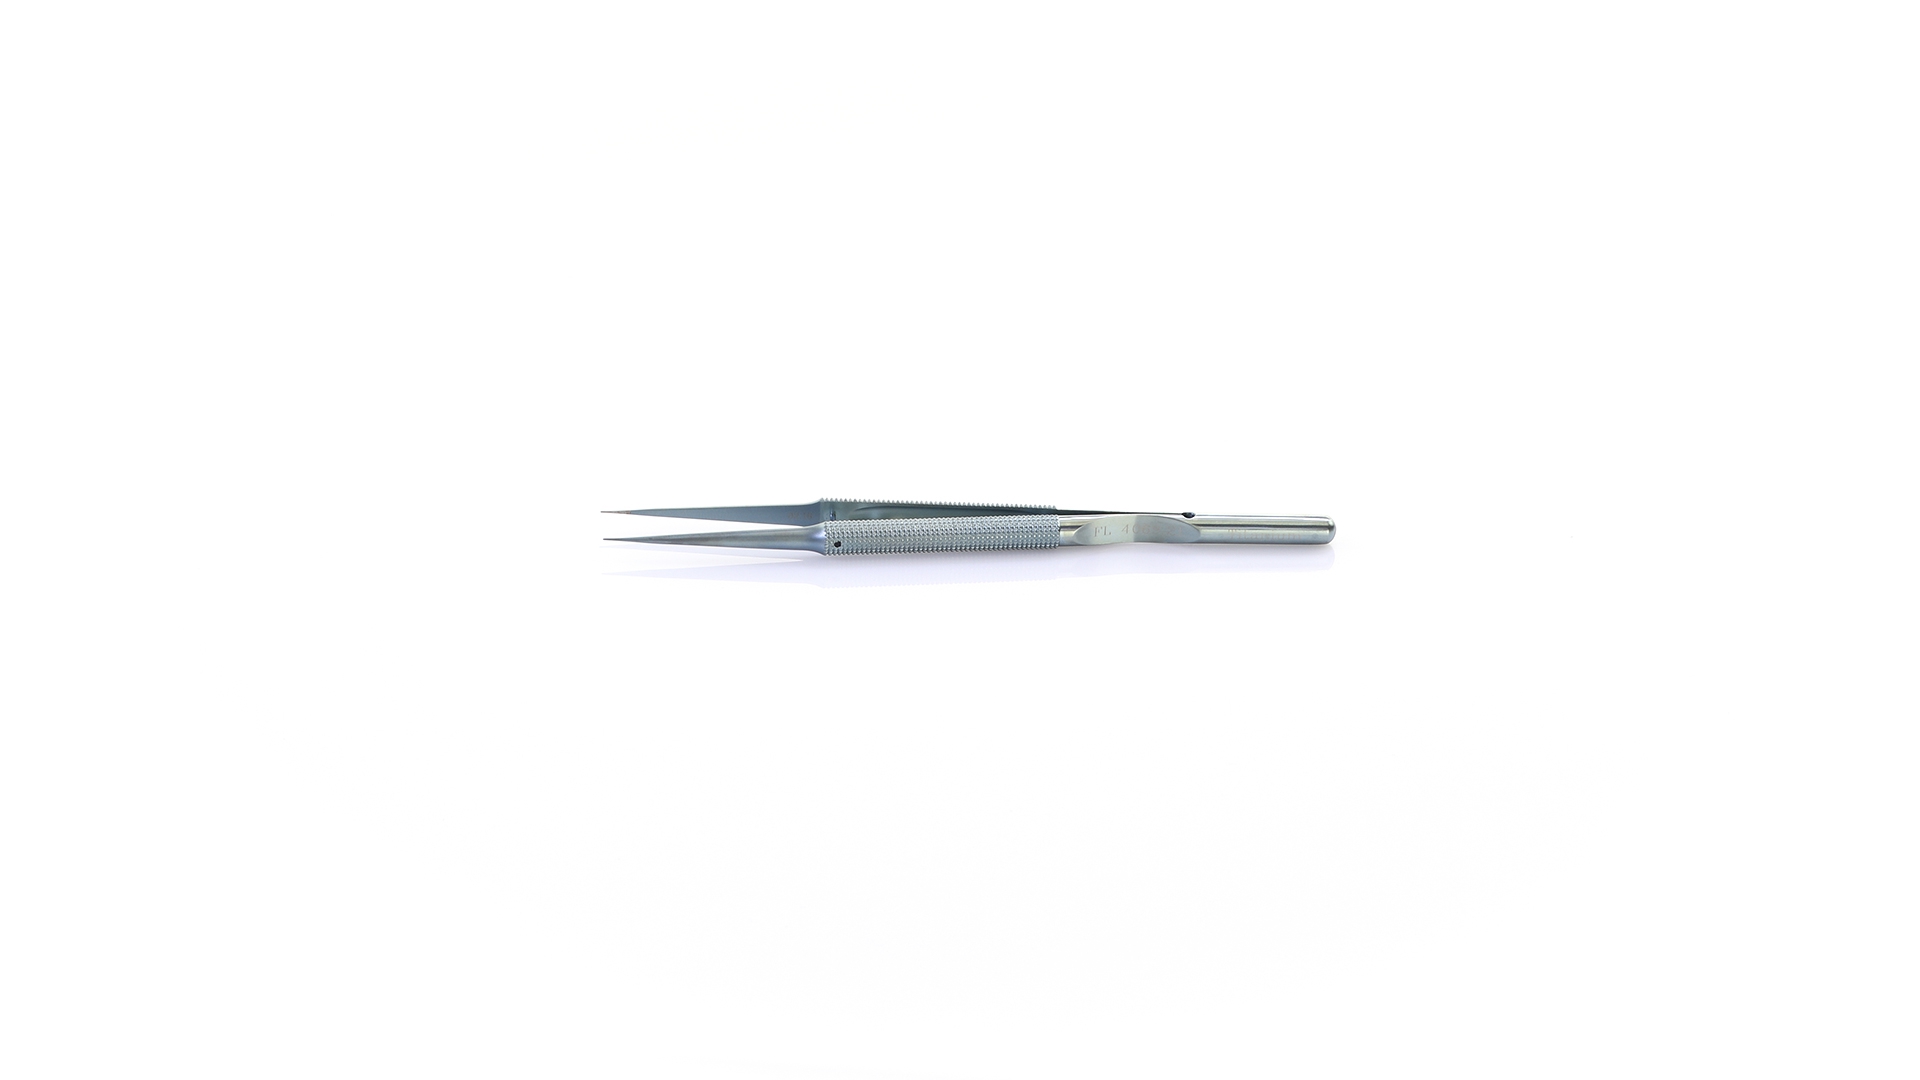 Micro Forceps - Straight TC coated 0.4mm tips